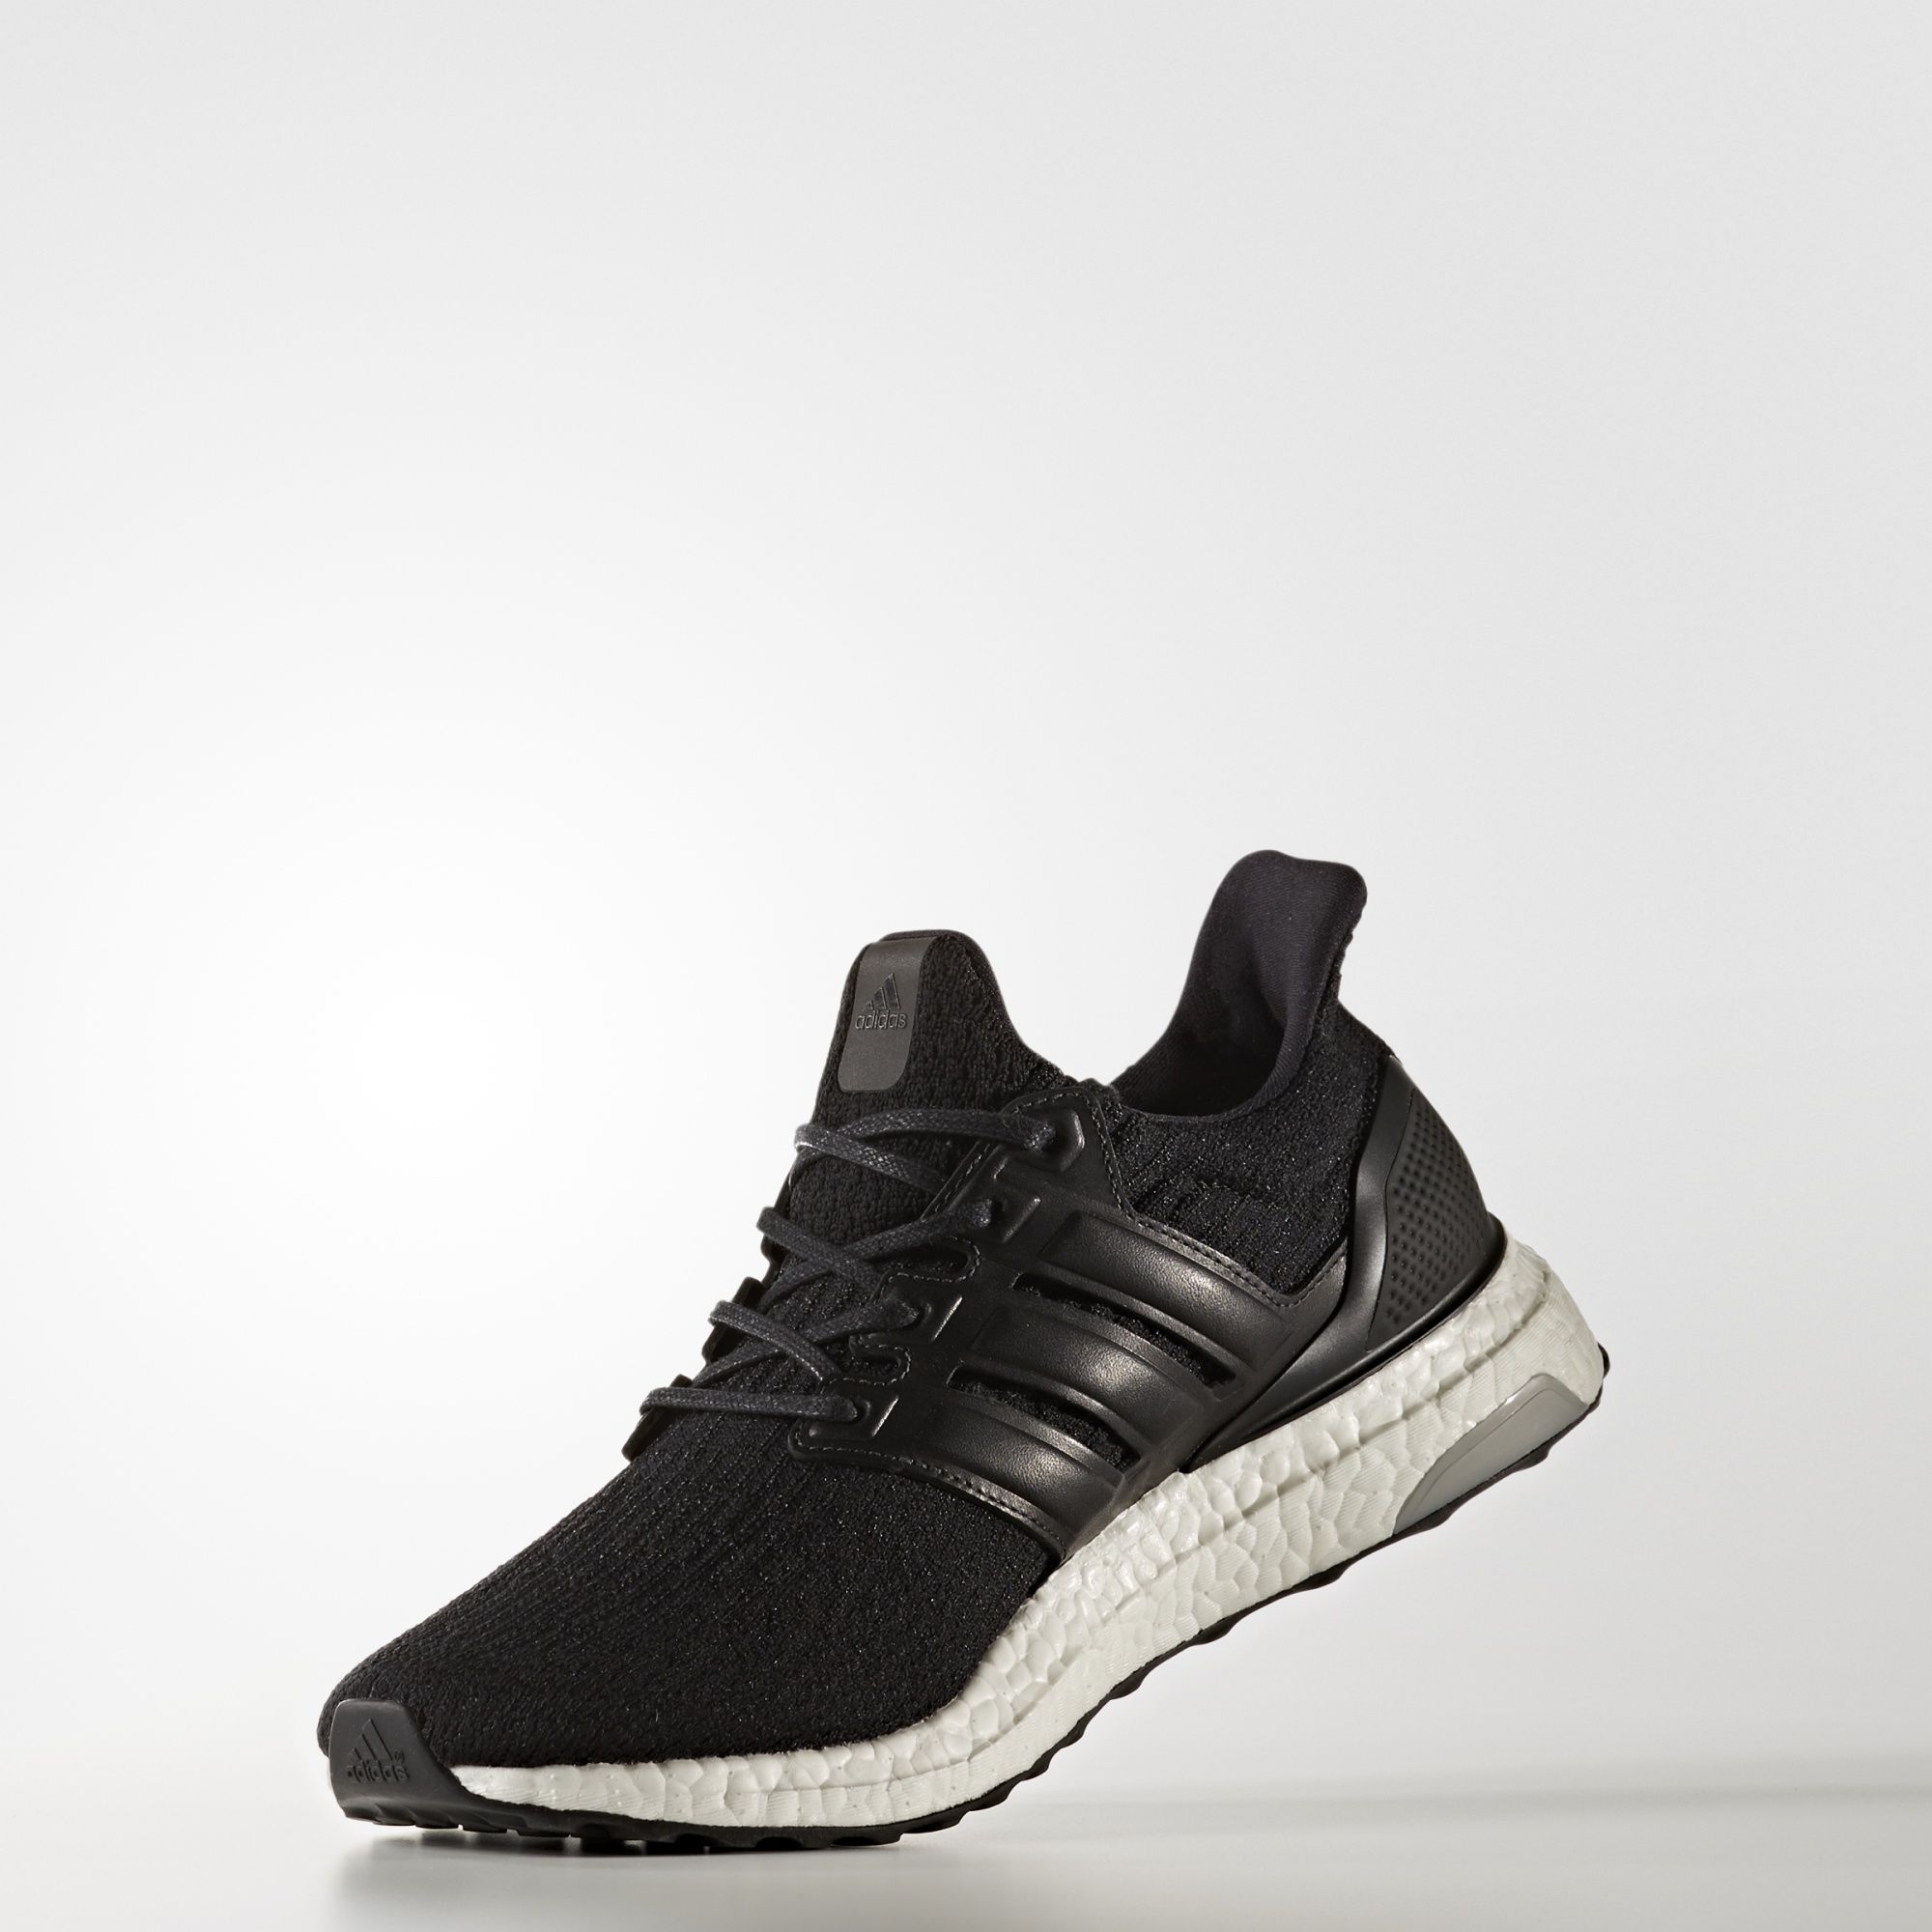 adidas-ultra-boost-3-limited-edition-core-black-3